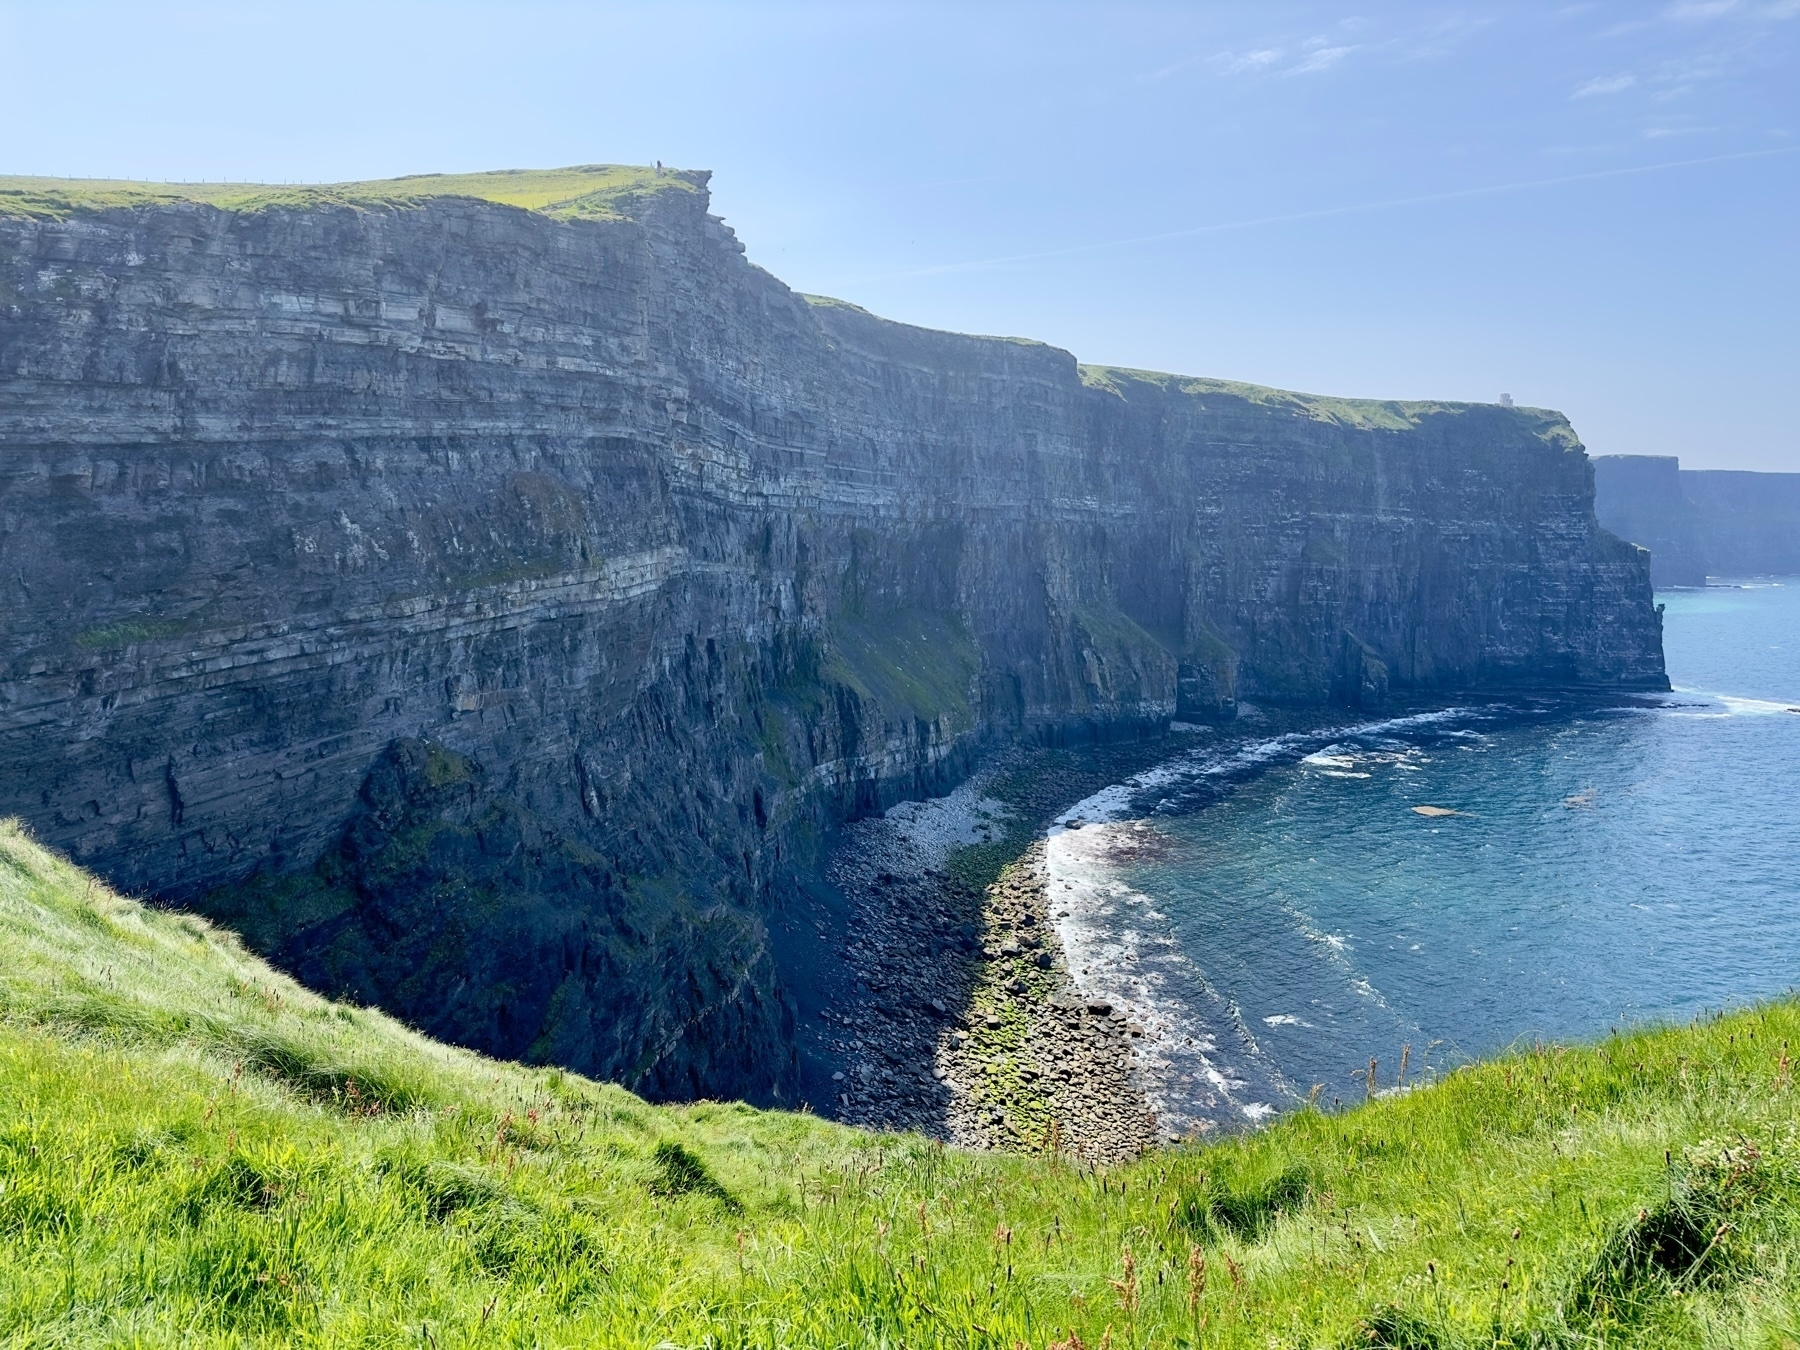 Auto-generated description: A majestic coastal cliff with layered rock formations overlooks a serene shoreline and vibrant blue sea under a clear sky.